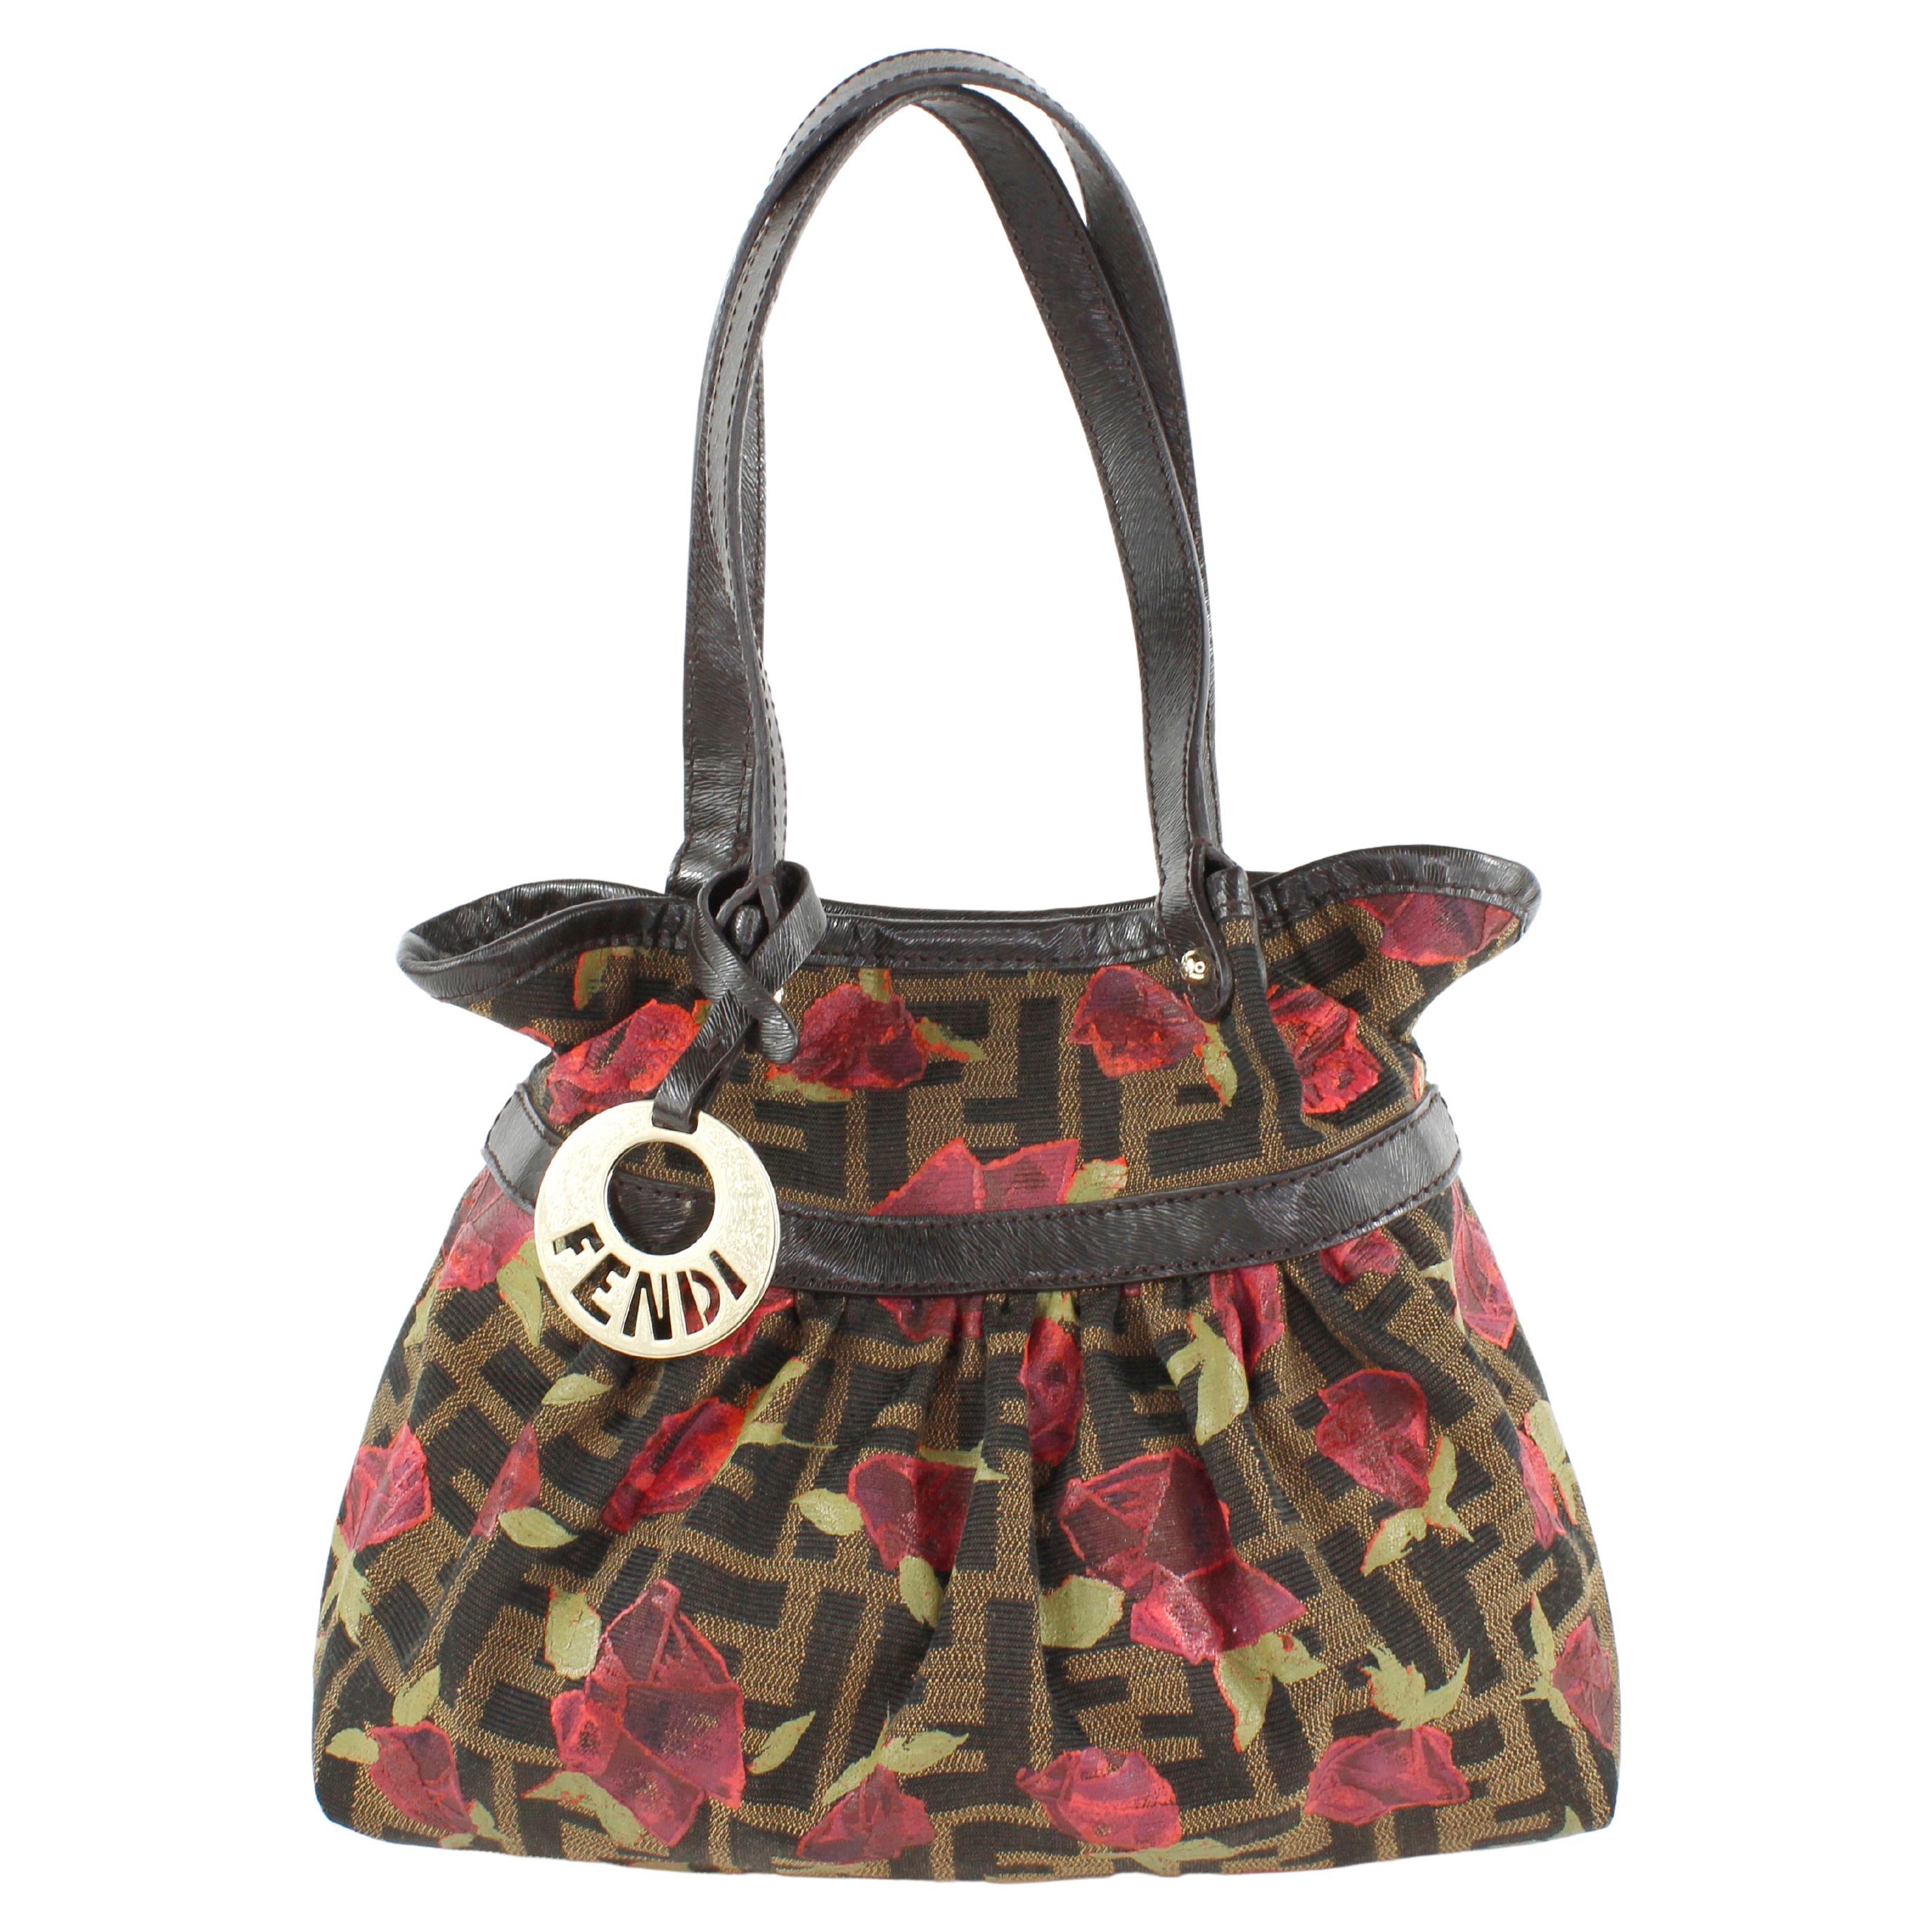 Fendi Bag with hand painted flowers